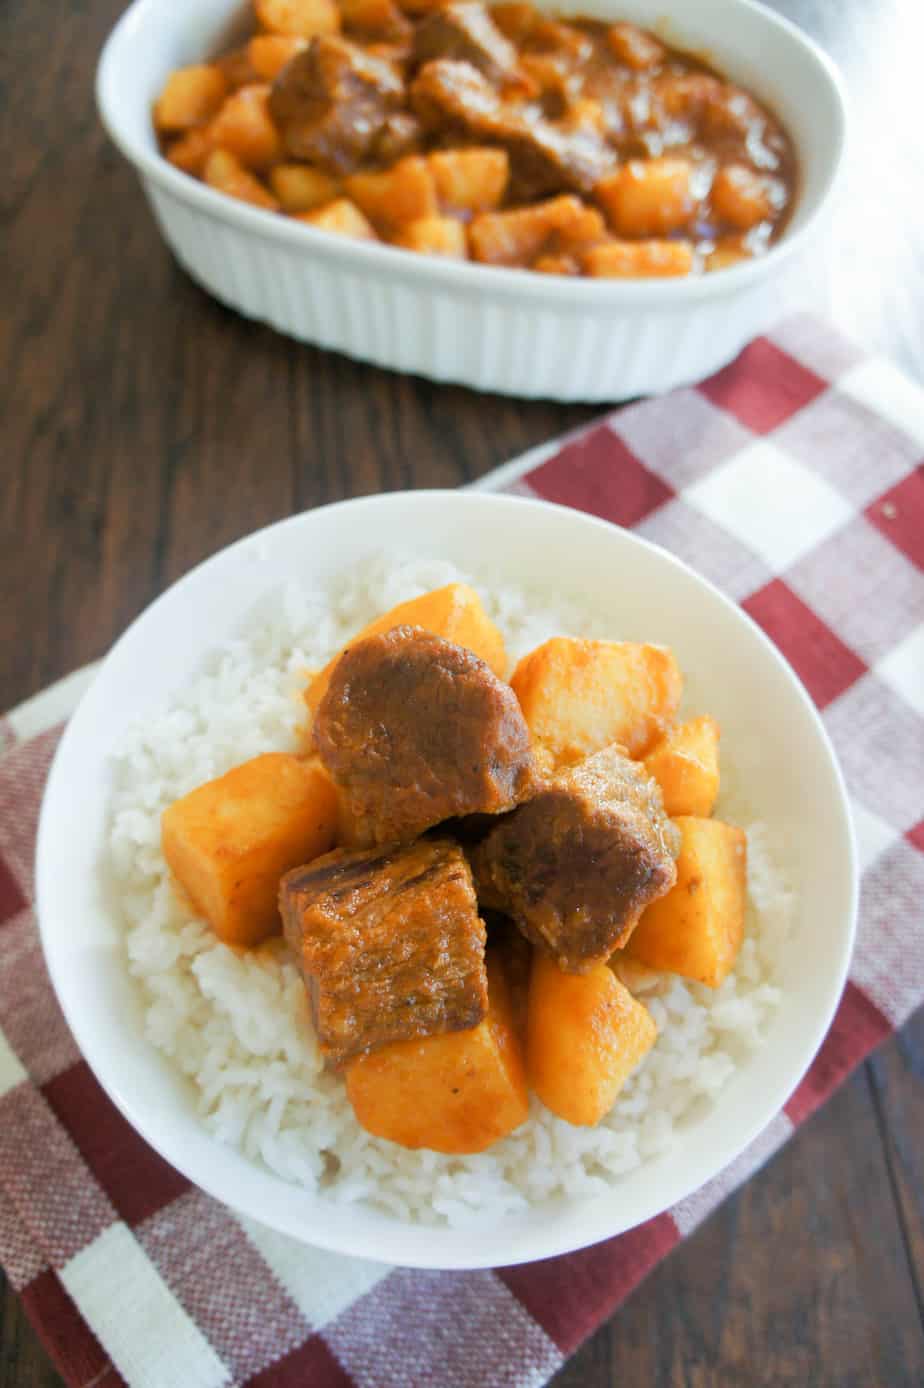 Cuban Carne Con Papas is the perfect comforting dinner the whole family will love!